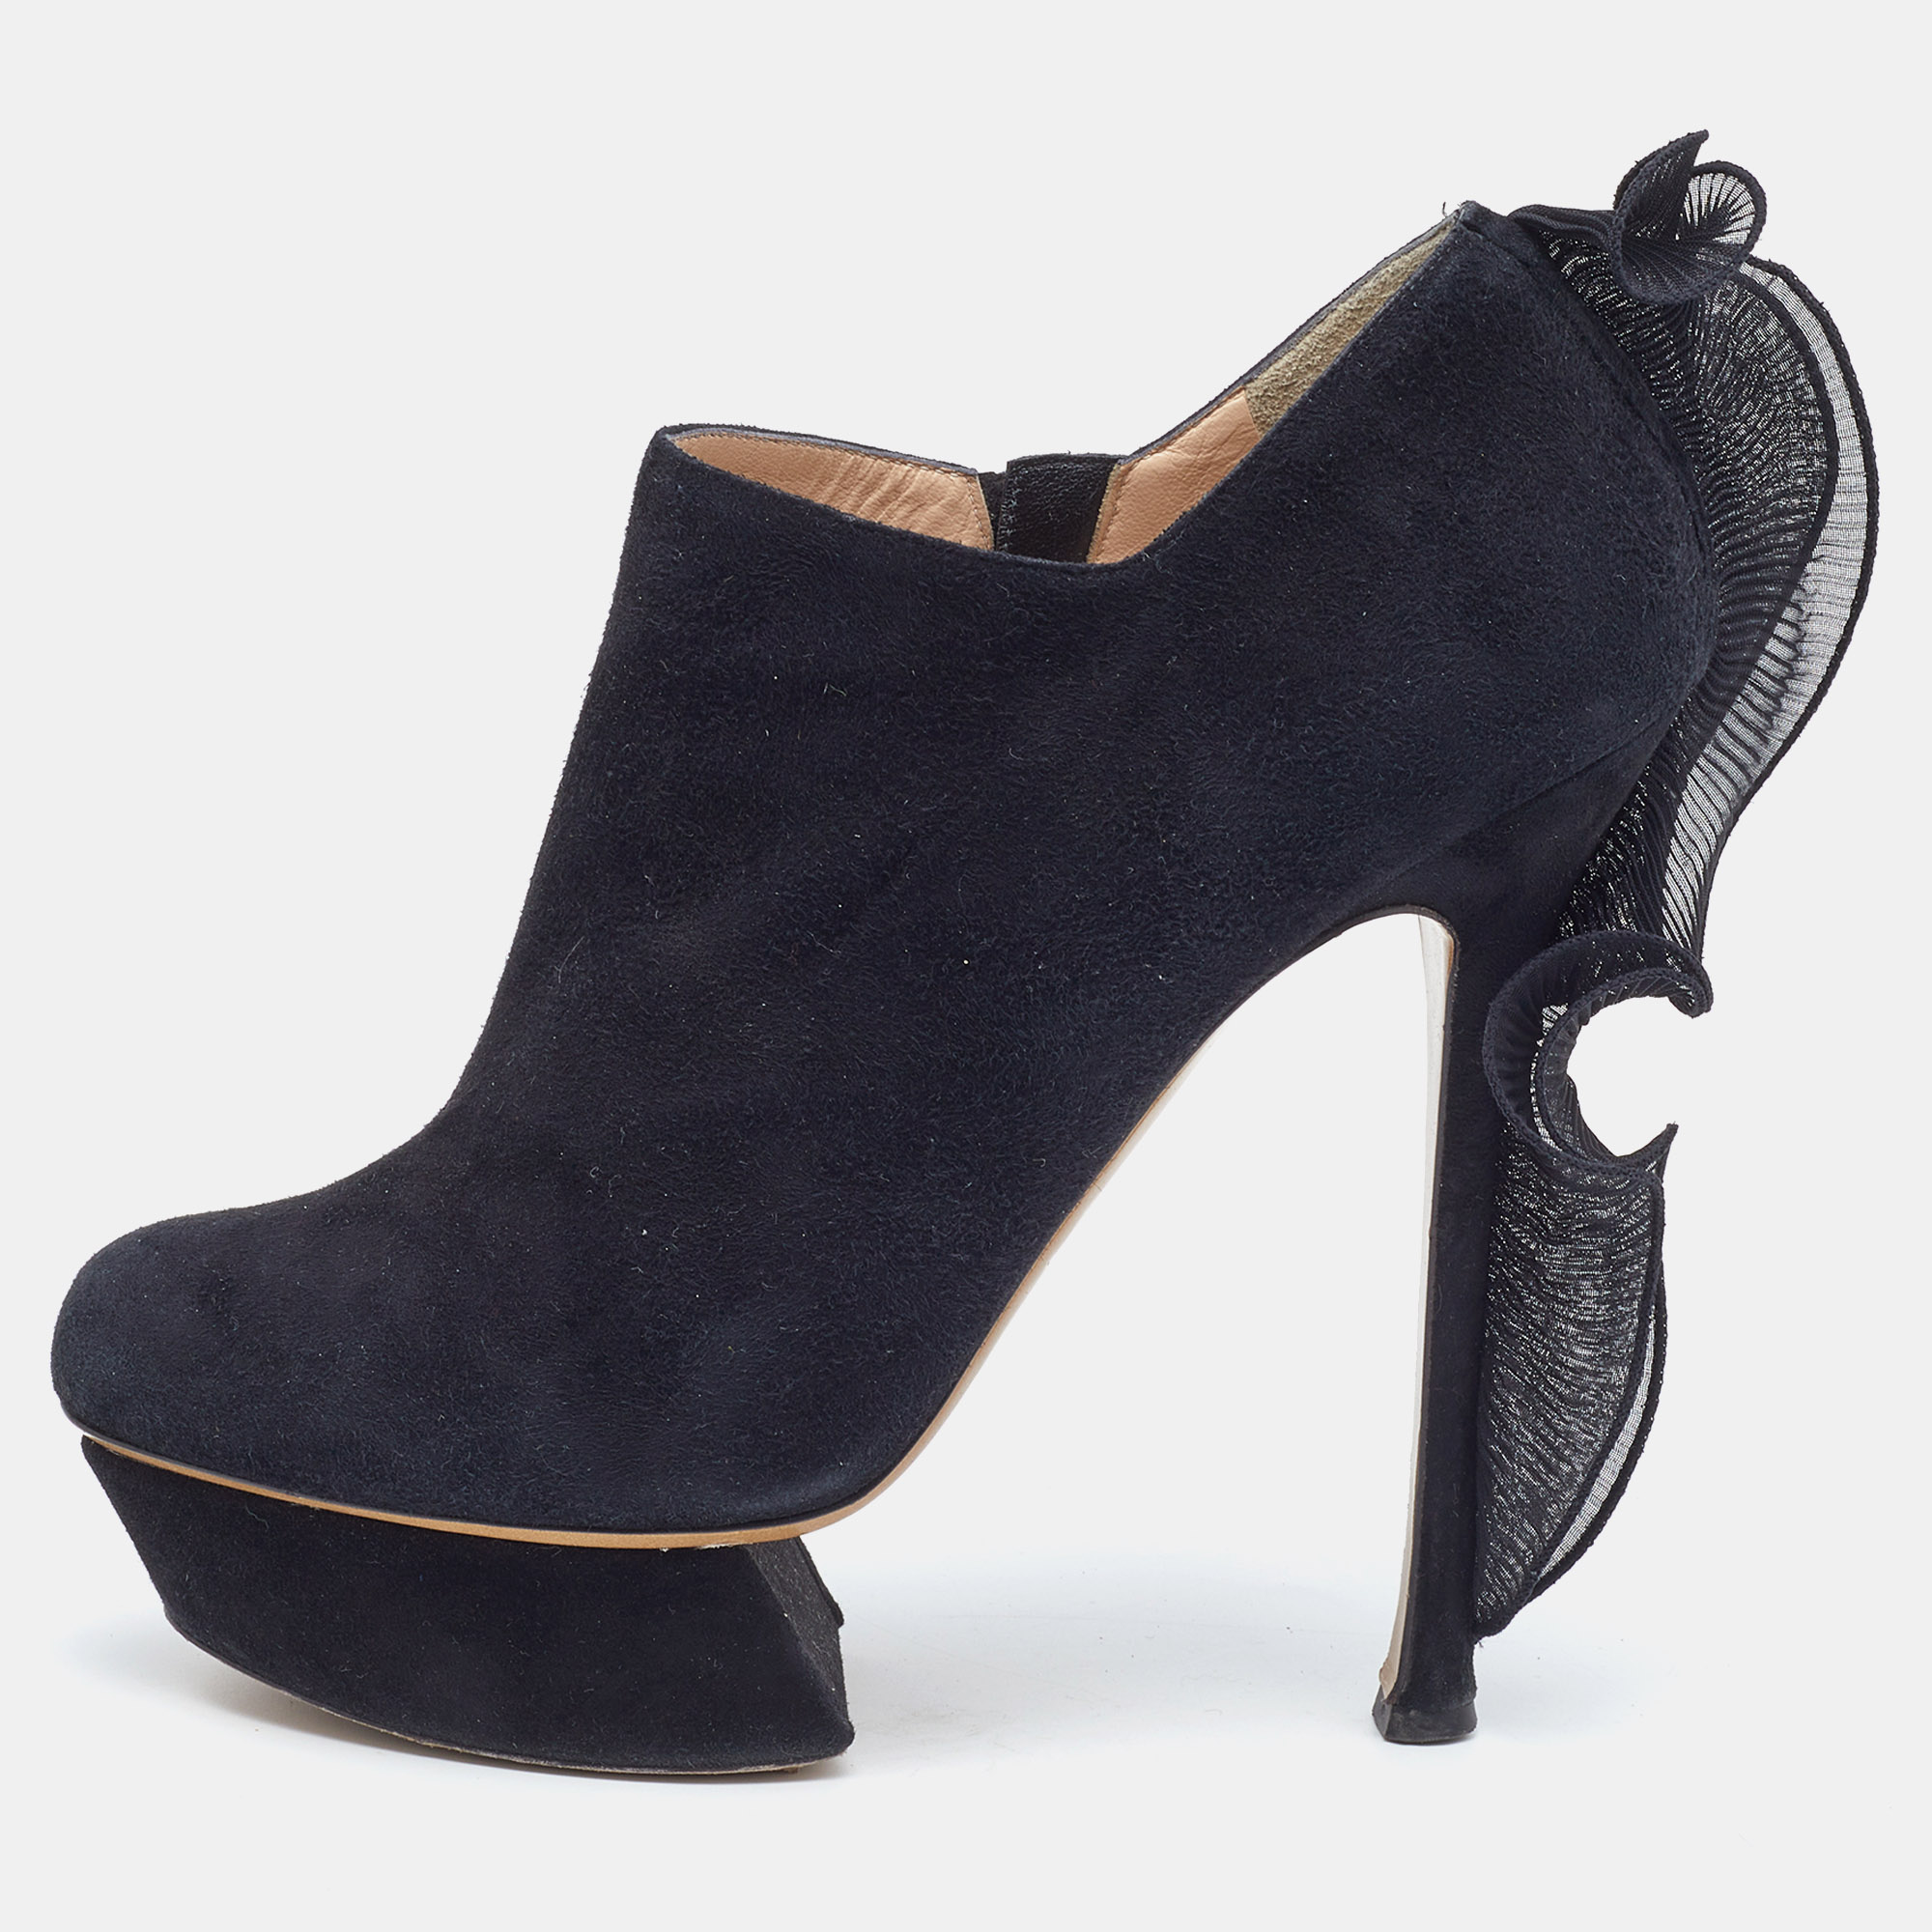 Giving classic black pumps an update Nicholas Kirkwood adds flair to British sensibility. With a graceful ruffle trim on the counters this pair features a chic design aesthetic. Elevated by platforms it has soft comfortable suede uppers.